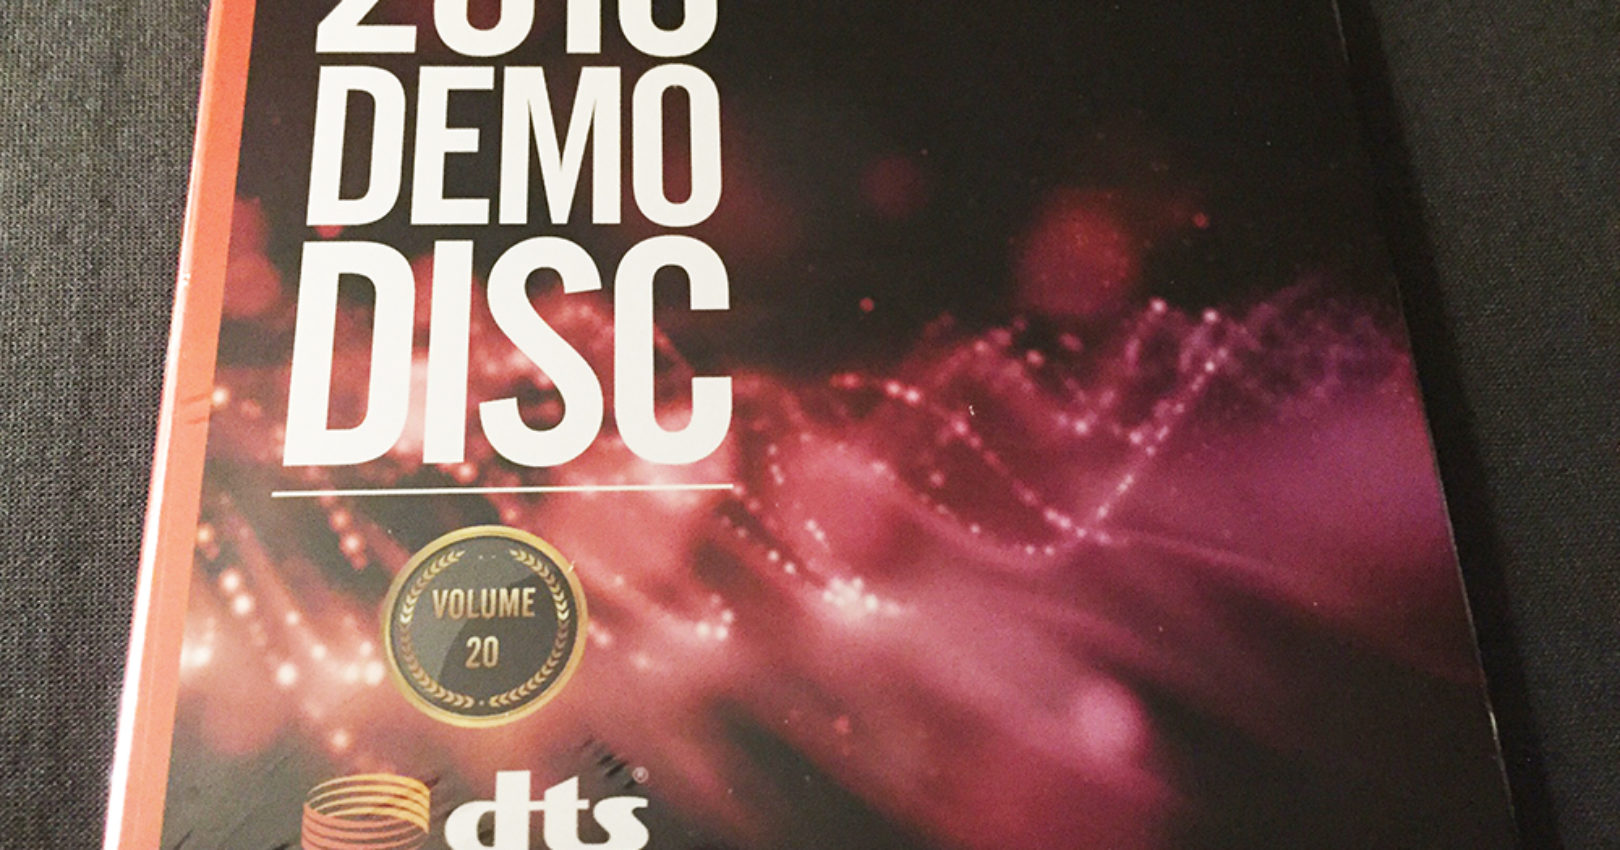 dolby atmos demo disc 2017 download